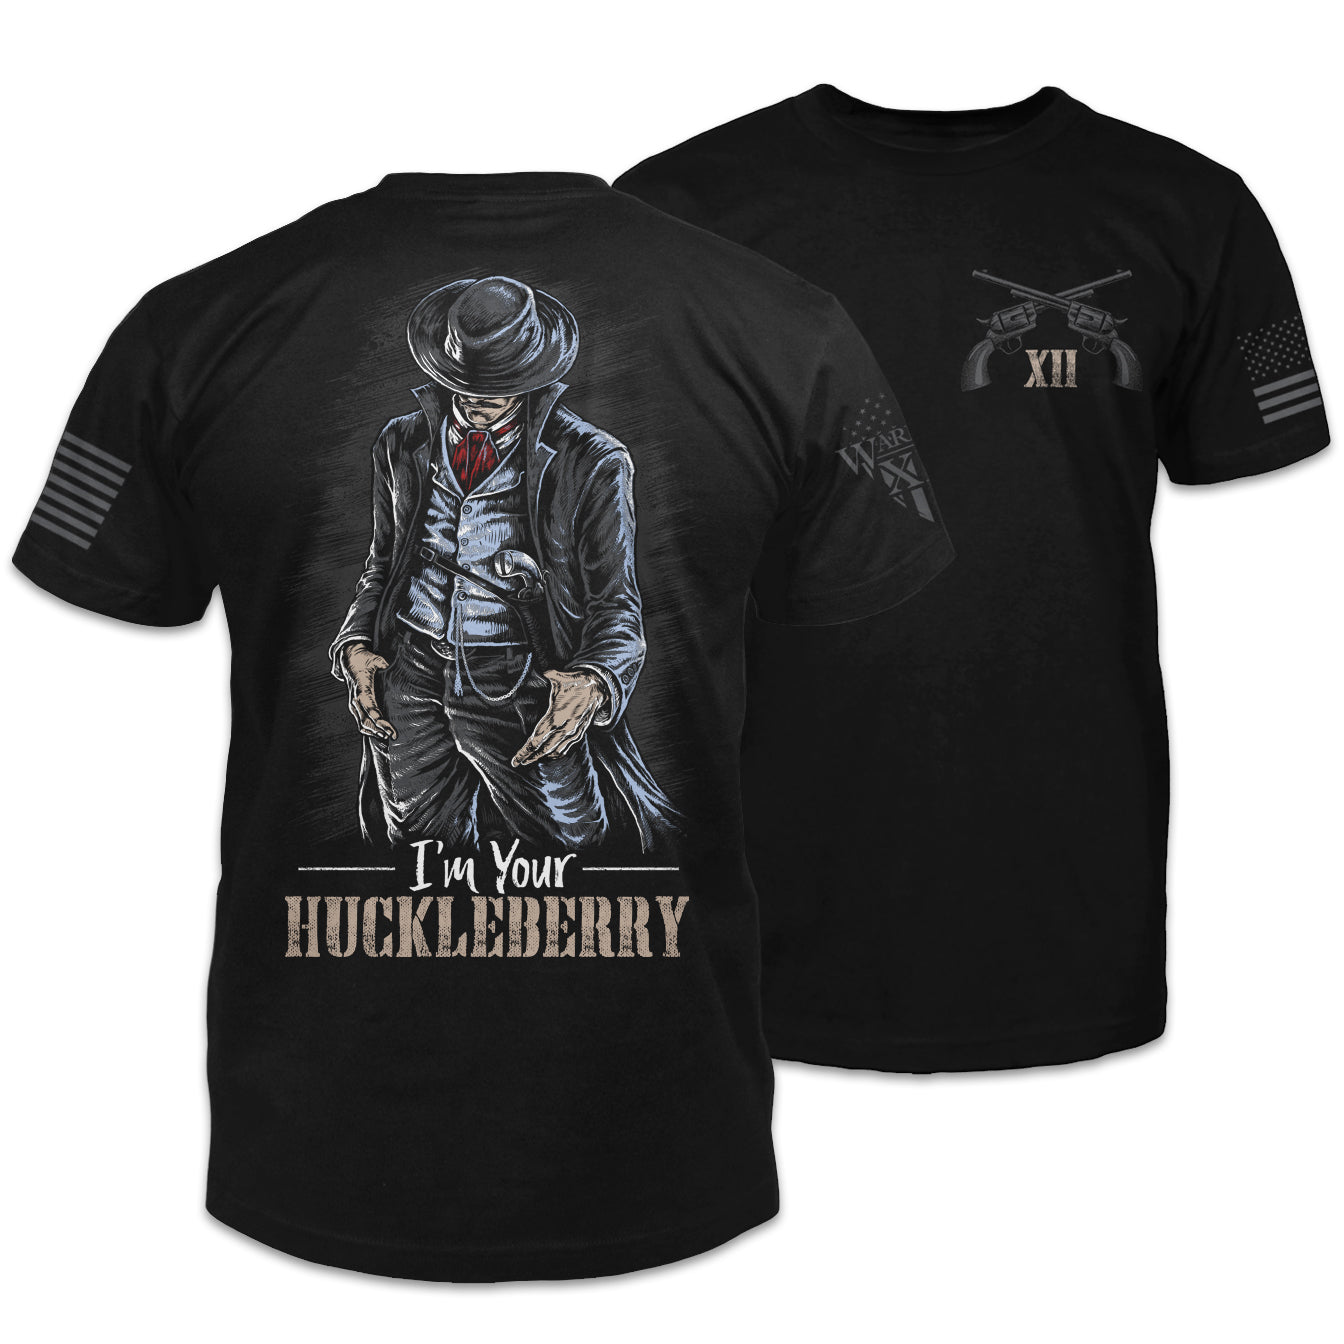 Front & back black t-shirt with the words "I'm your Huckleberry" with a cowboy printed on the shirt.